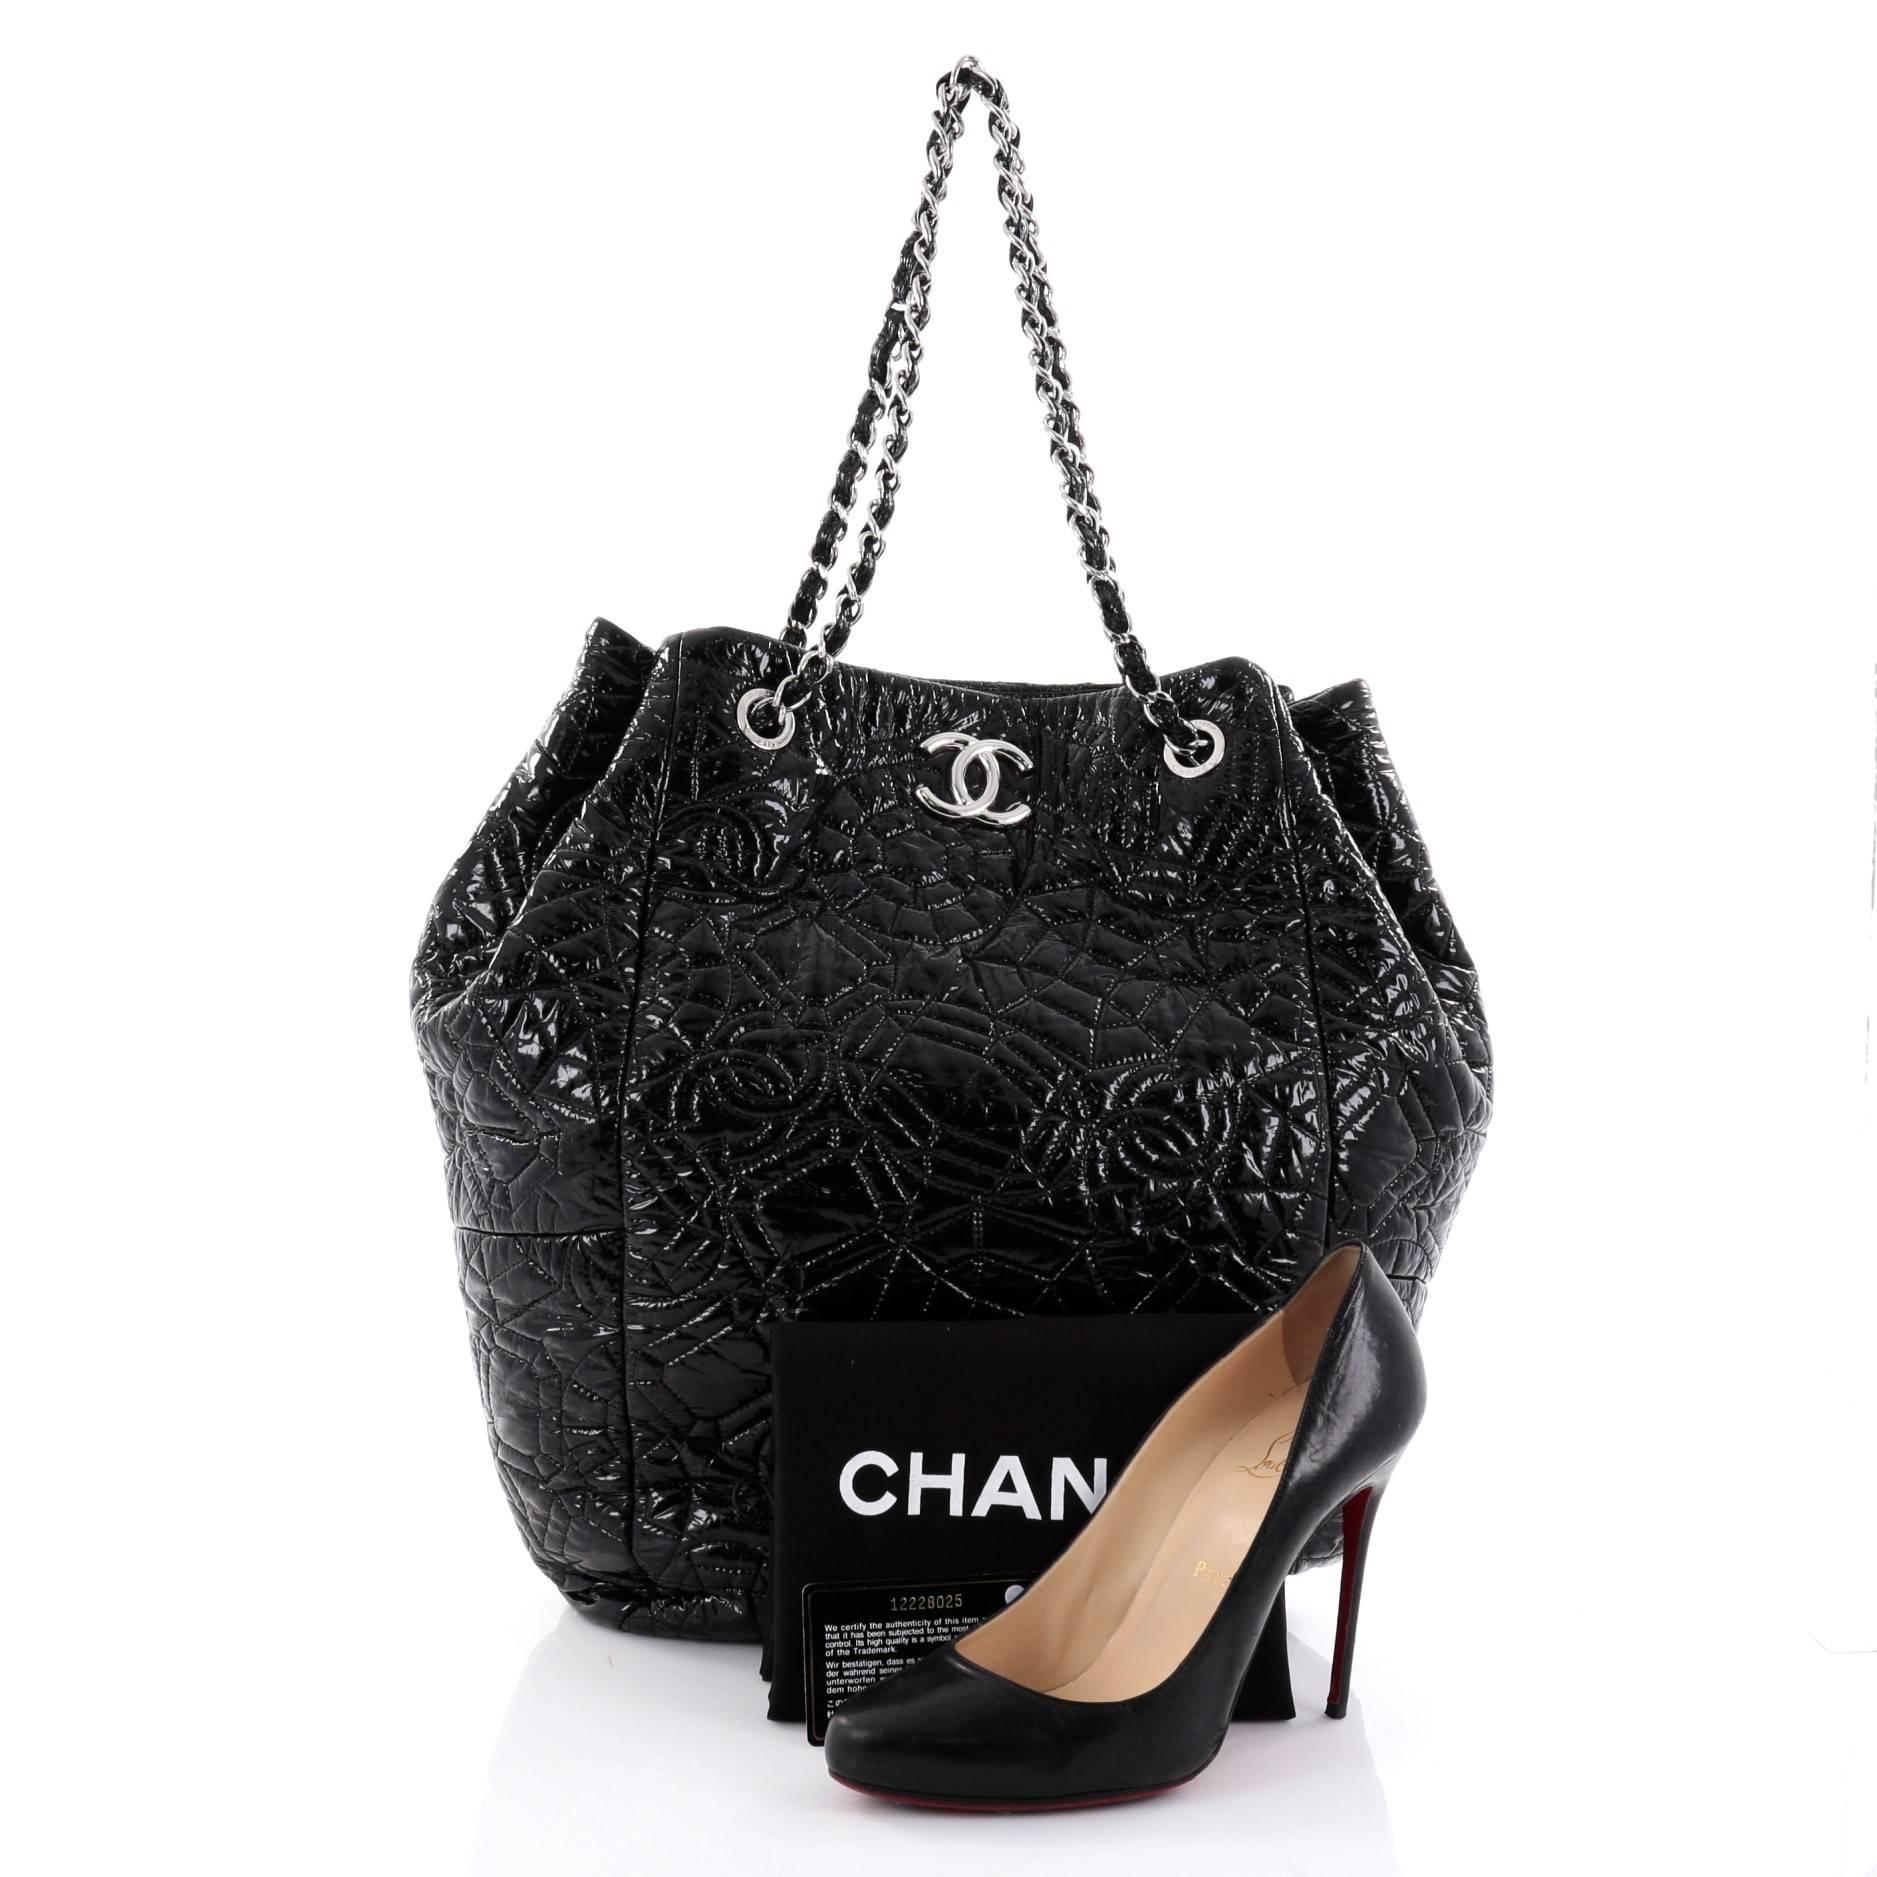 This authentic Chanel Graphic Edge Tote Patent Vinyl North South is an utterly chic and fabulous bag perfect for the modern fashionista. Crafted from black patent vinyl with quilted CC logos and geometric patterns, this stylish bag features dual